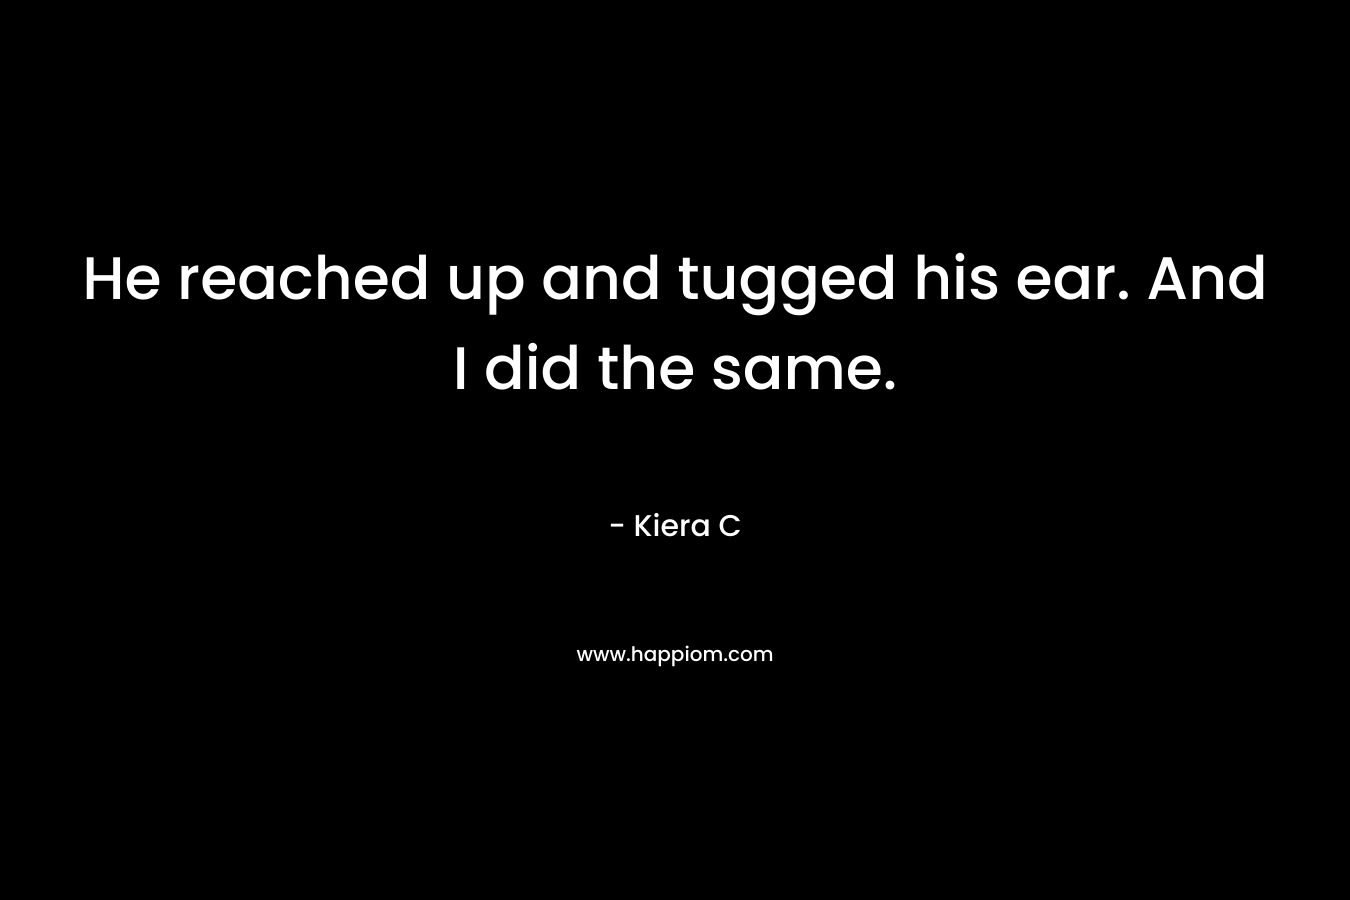 He reached up and tugged his ear. And I did the same. – Kiera C